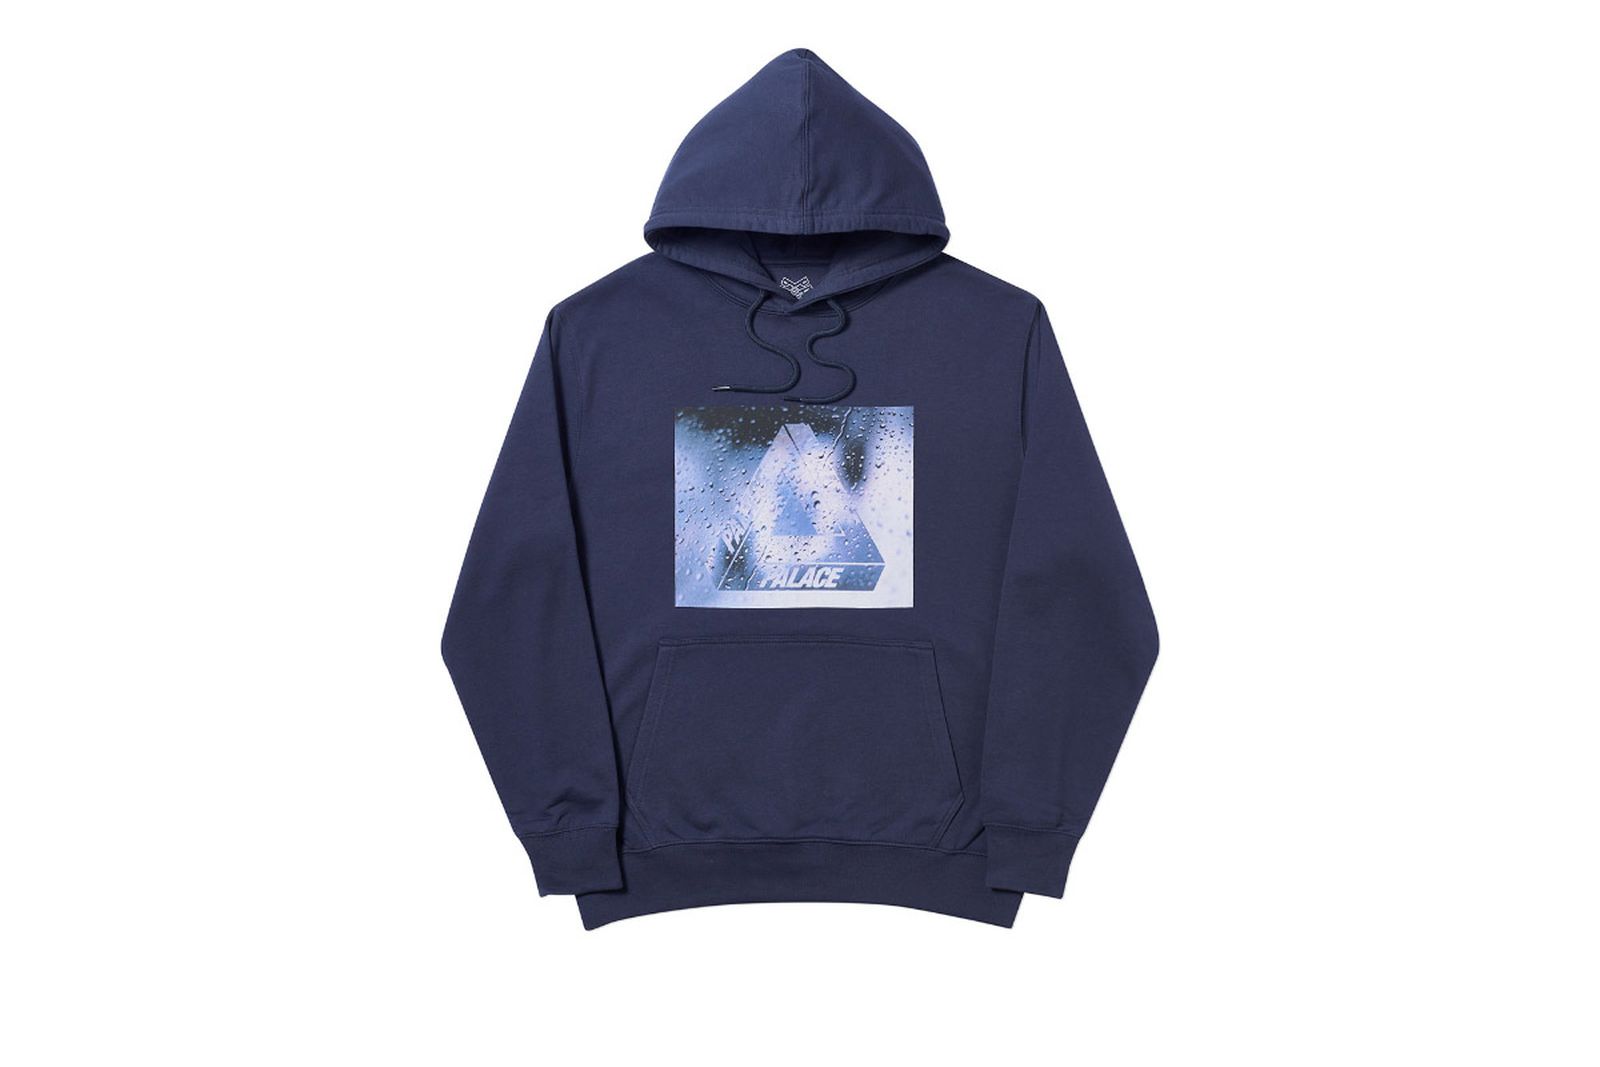 Palace 2019 Autumn Hoodie Window Licker navy front 14668 ADJUSTED